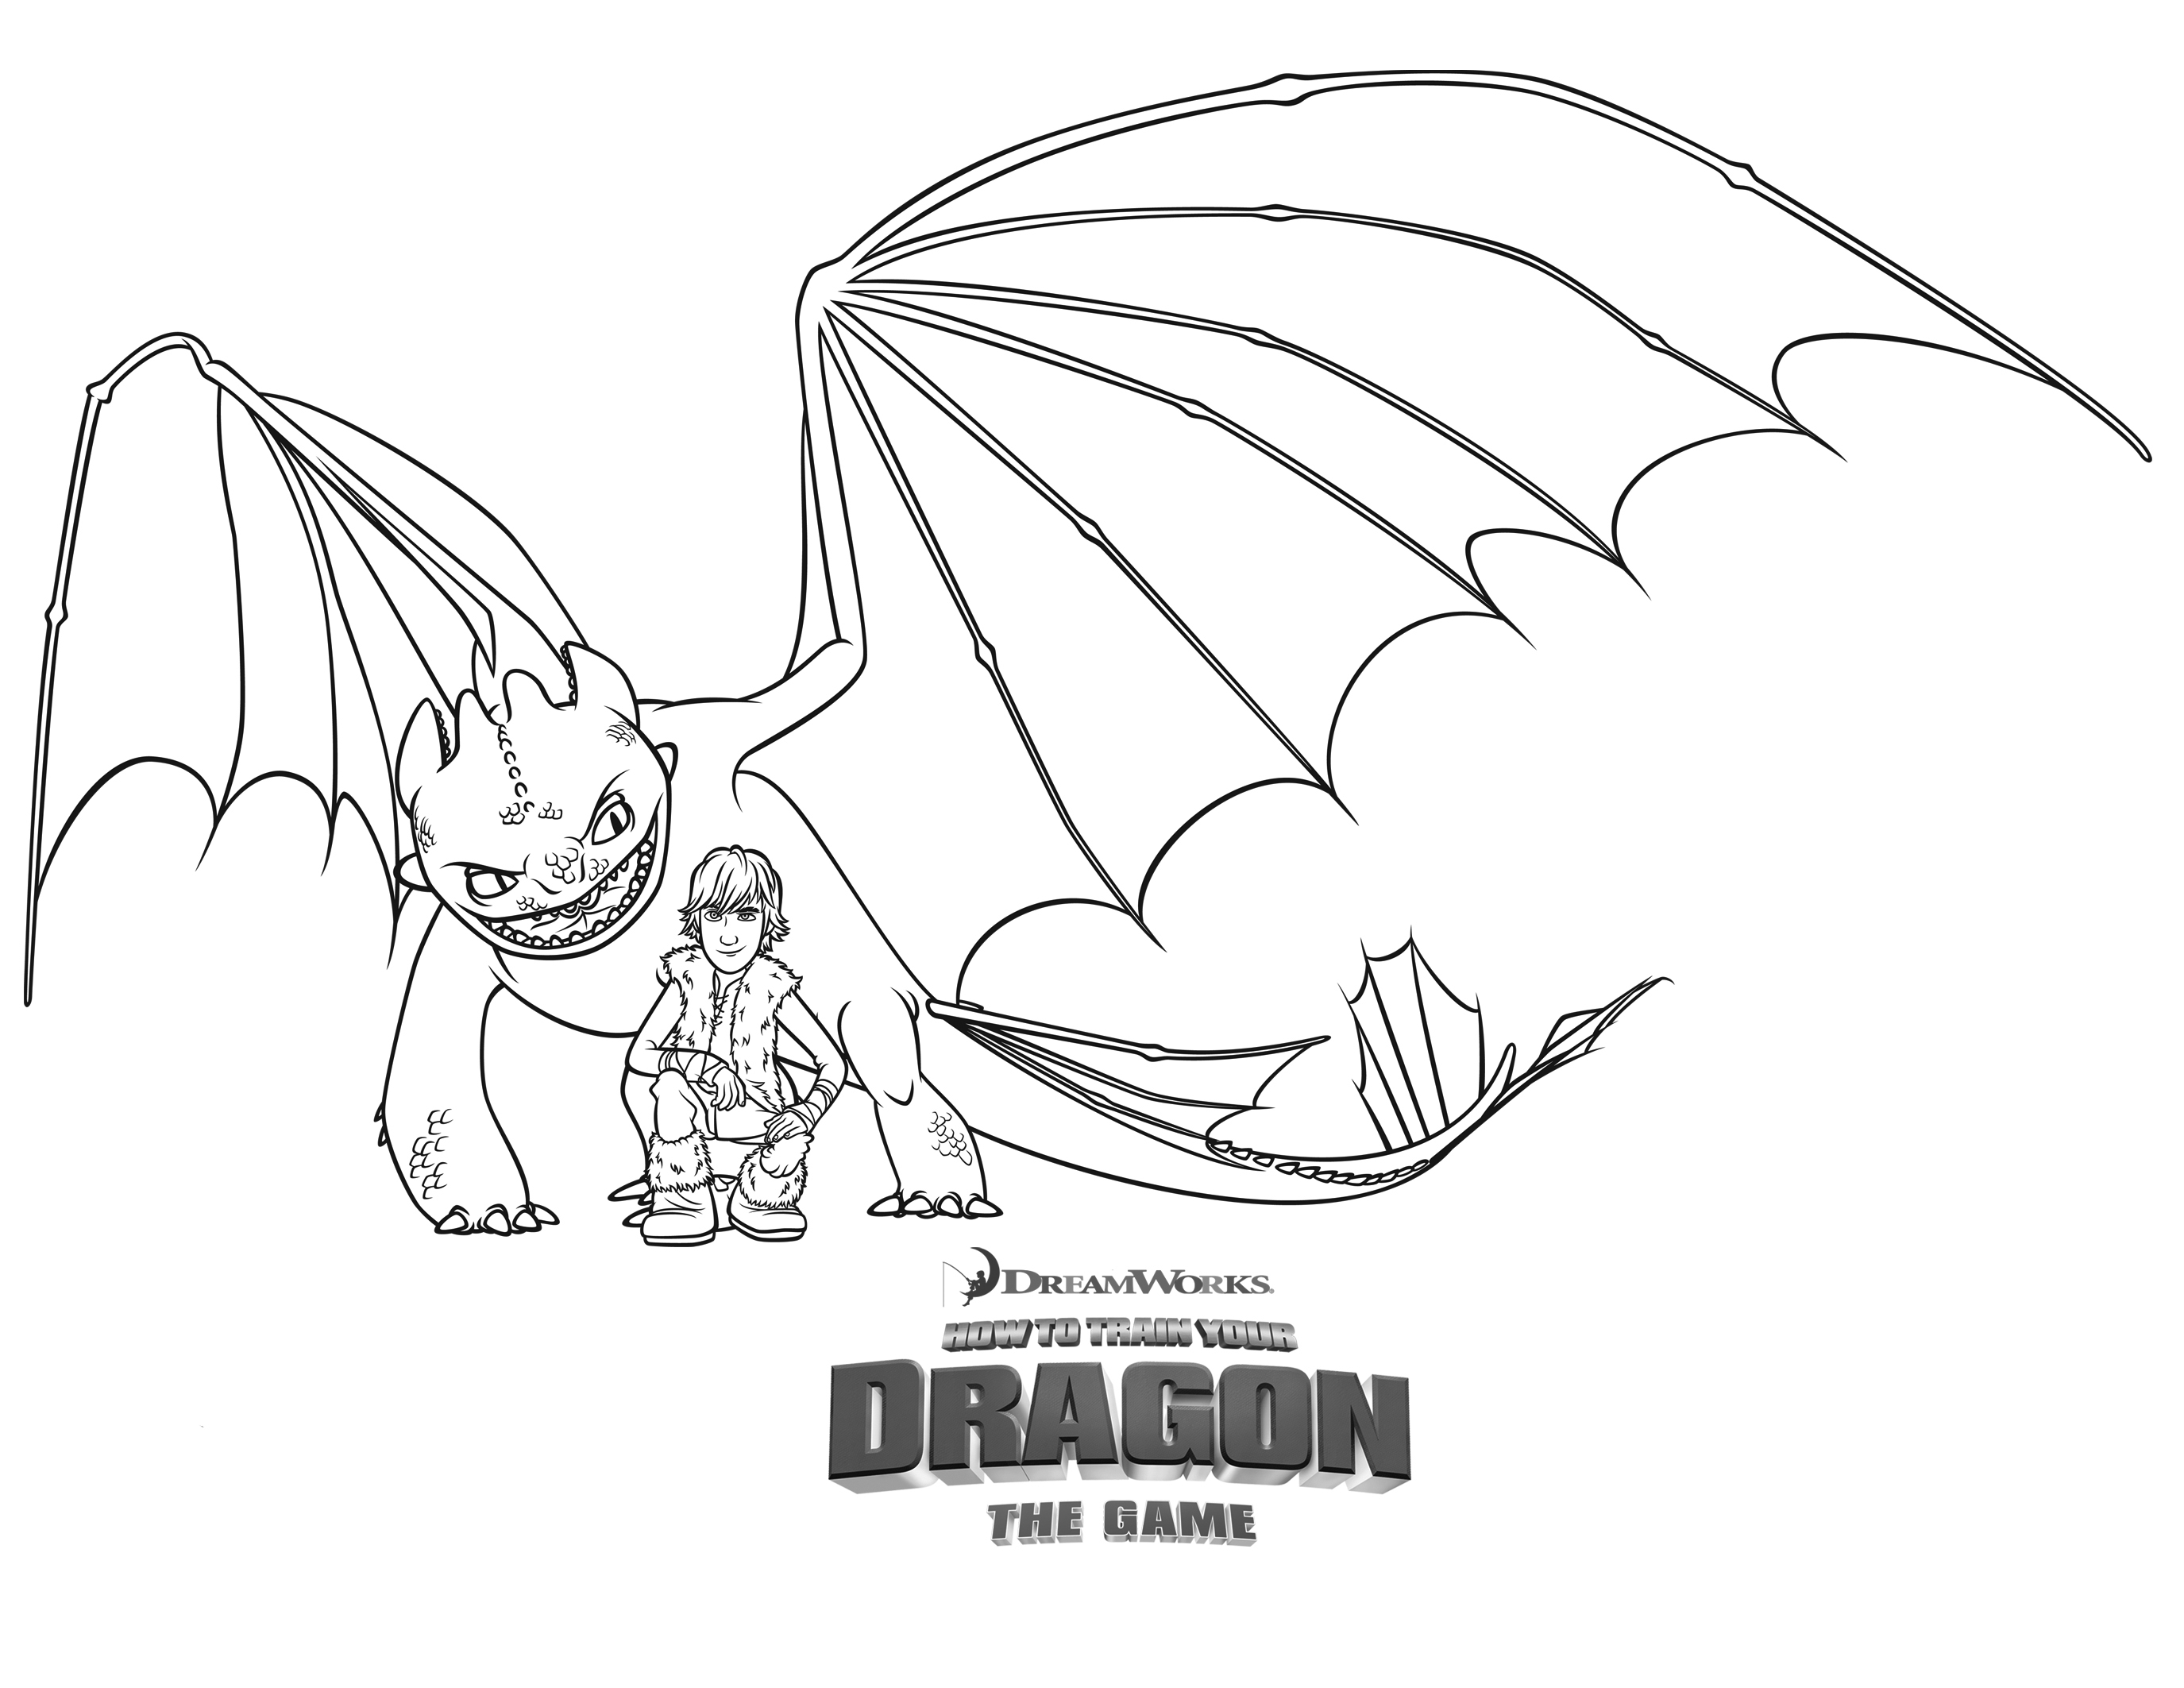 How to Train Your Dragon Coloring Pages - Best Coloring Pages For Kids